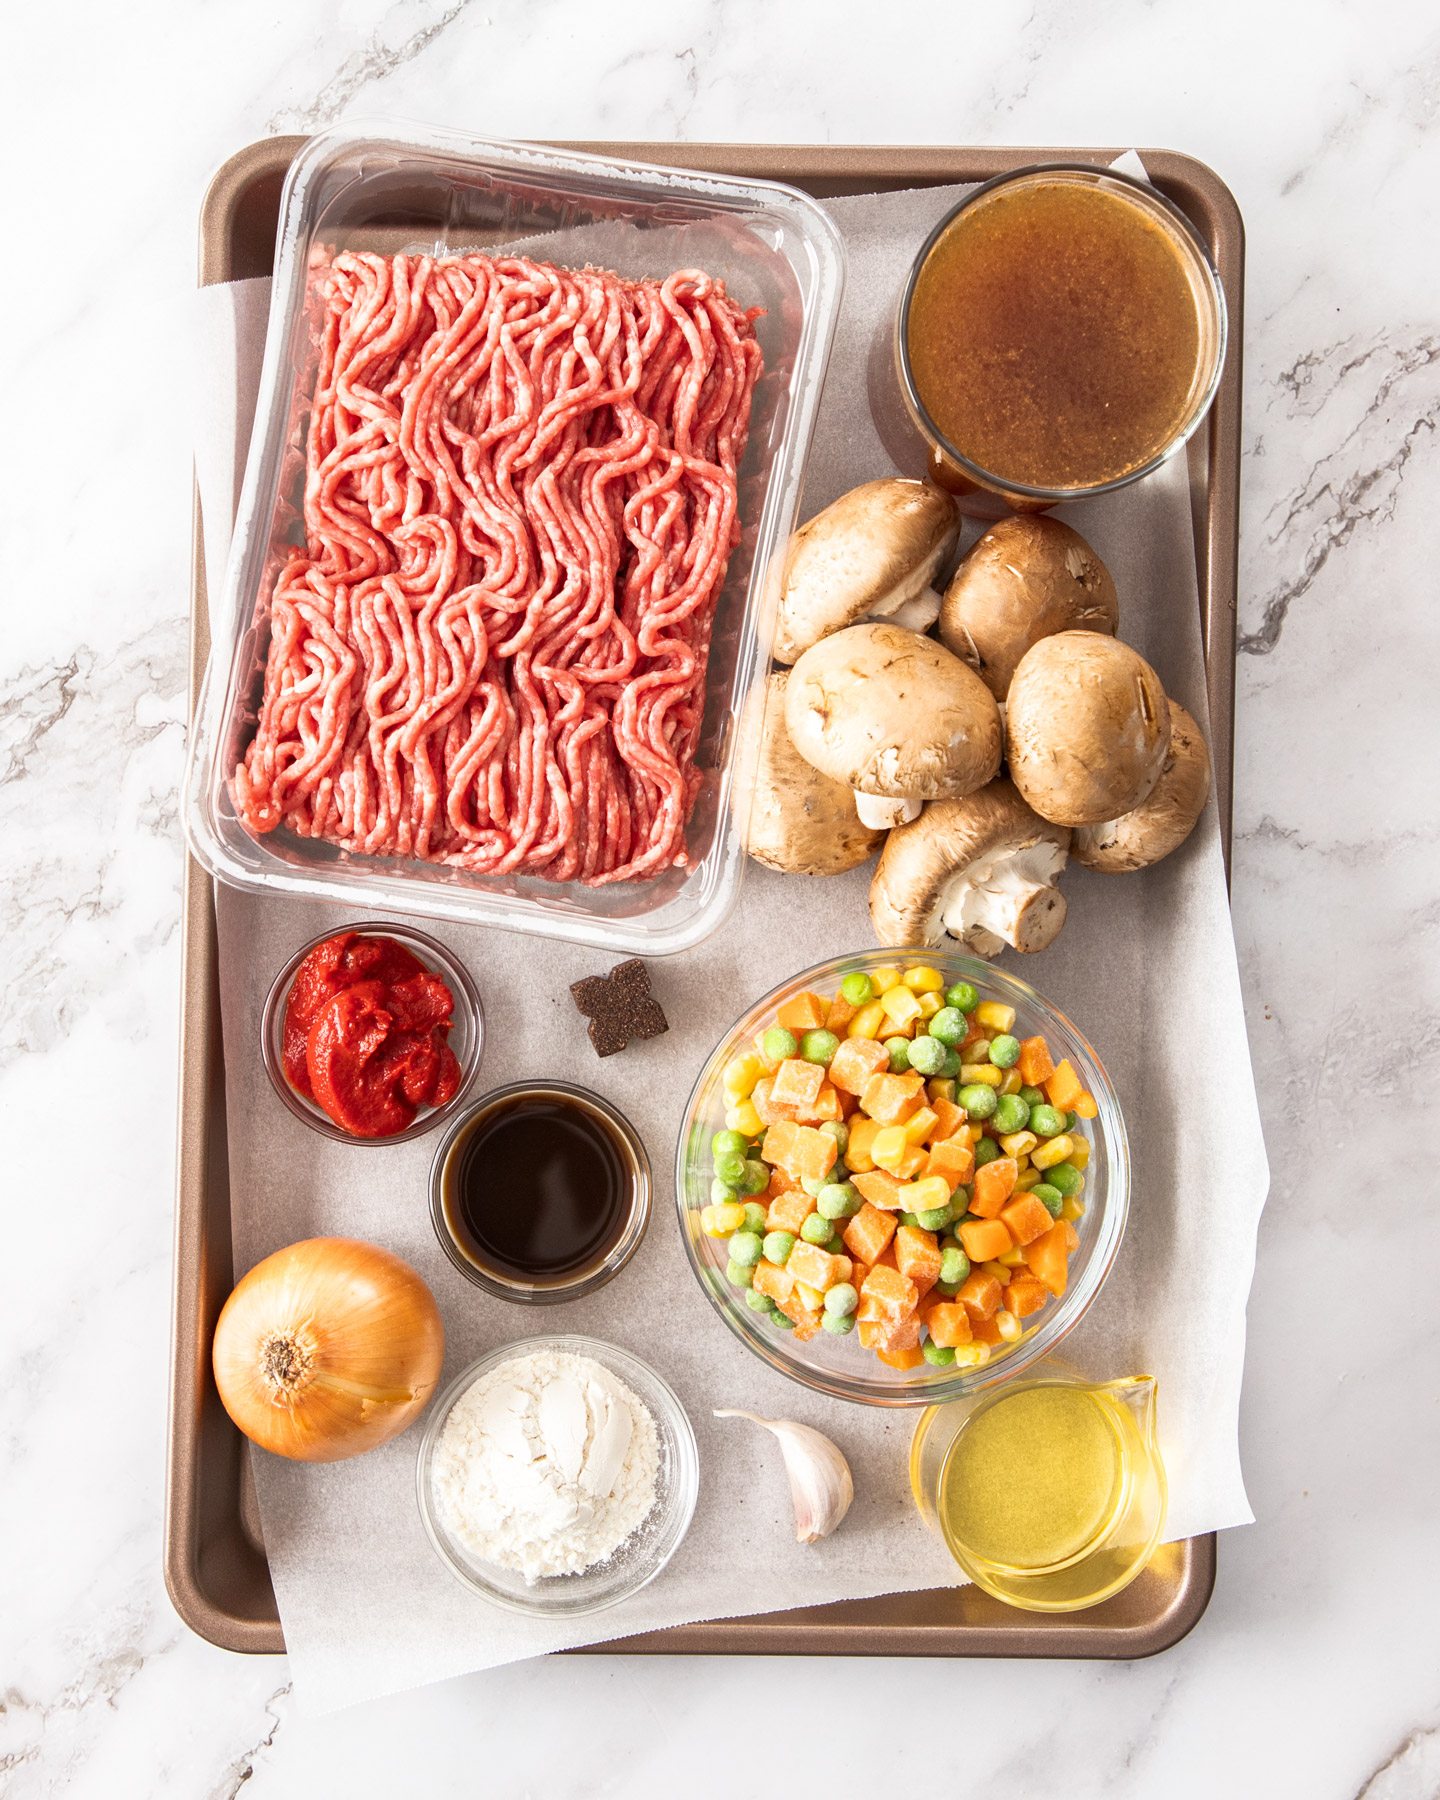 Ingredients for savoury mince on a baking tray.